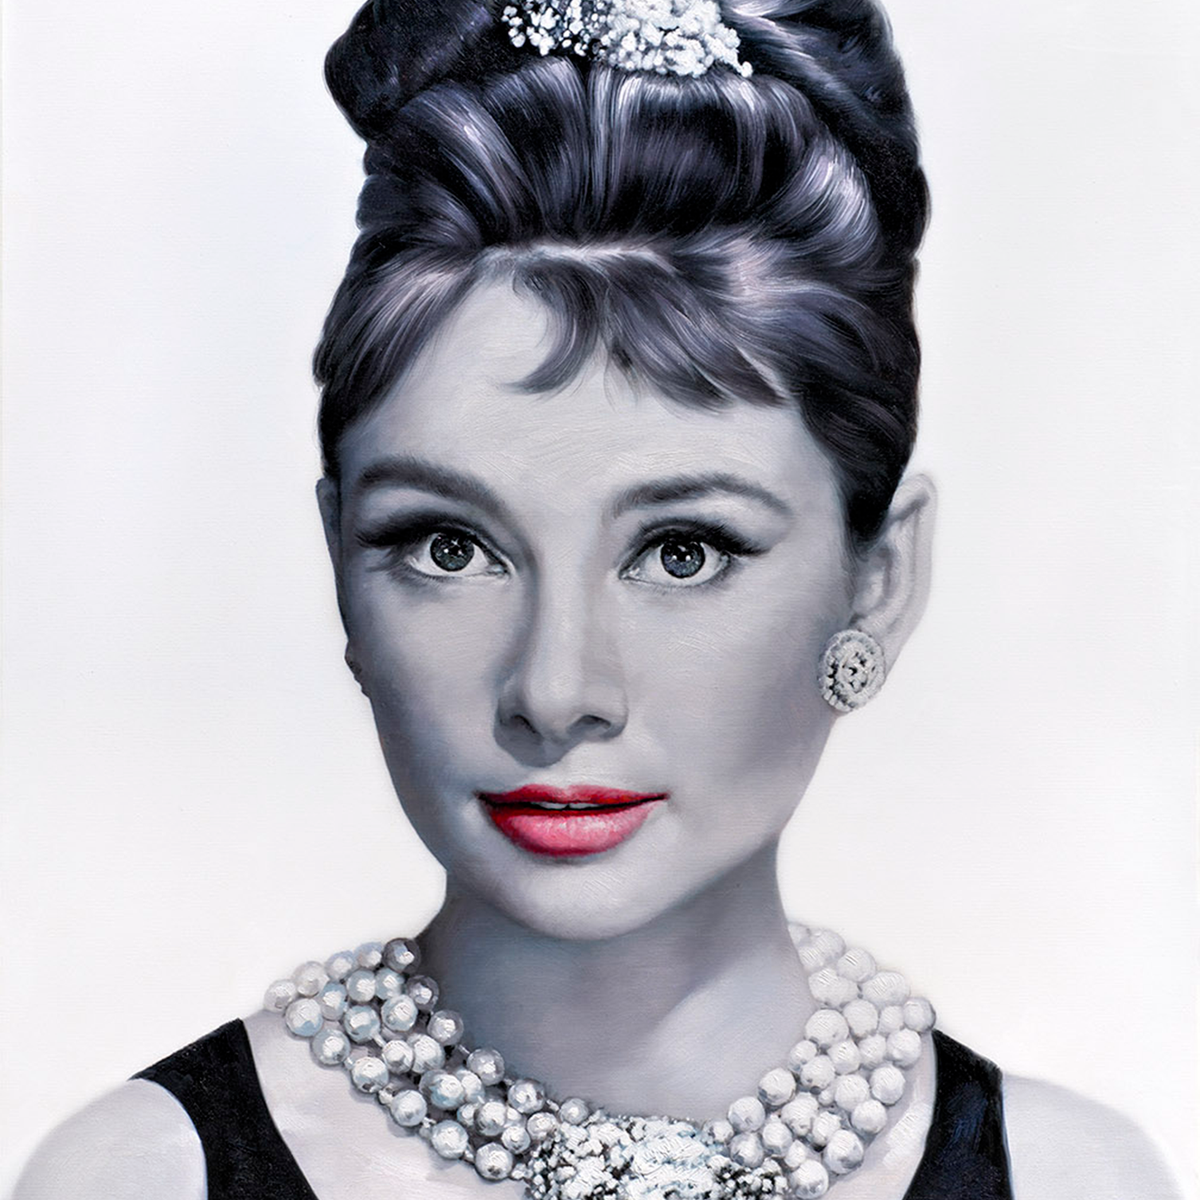 Audrey Hepburn wears pearl necklace w/a smile RARE Photo | eBay